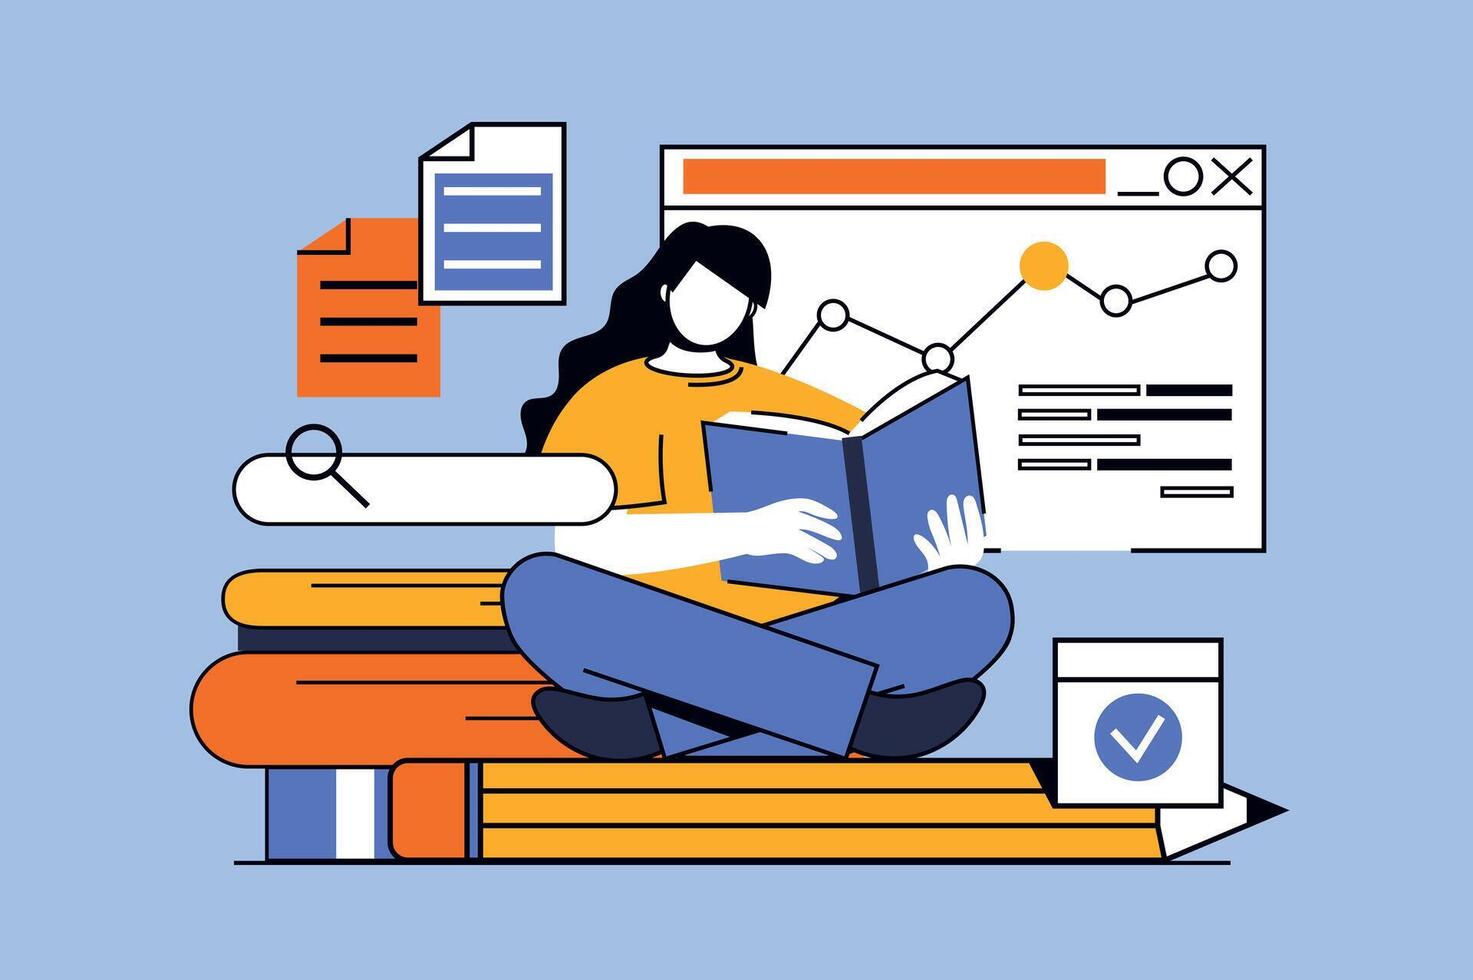 Back to school concept with people scene in flat design for web. Student reads books, makes homework with textbook, preparing to exam. Vector illustration for social media banner, marketing material.